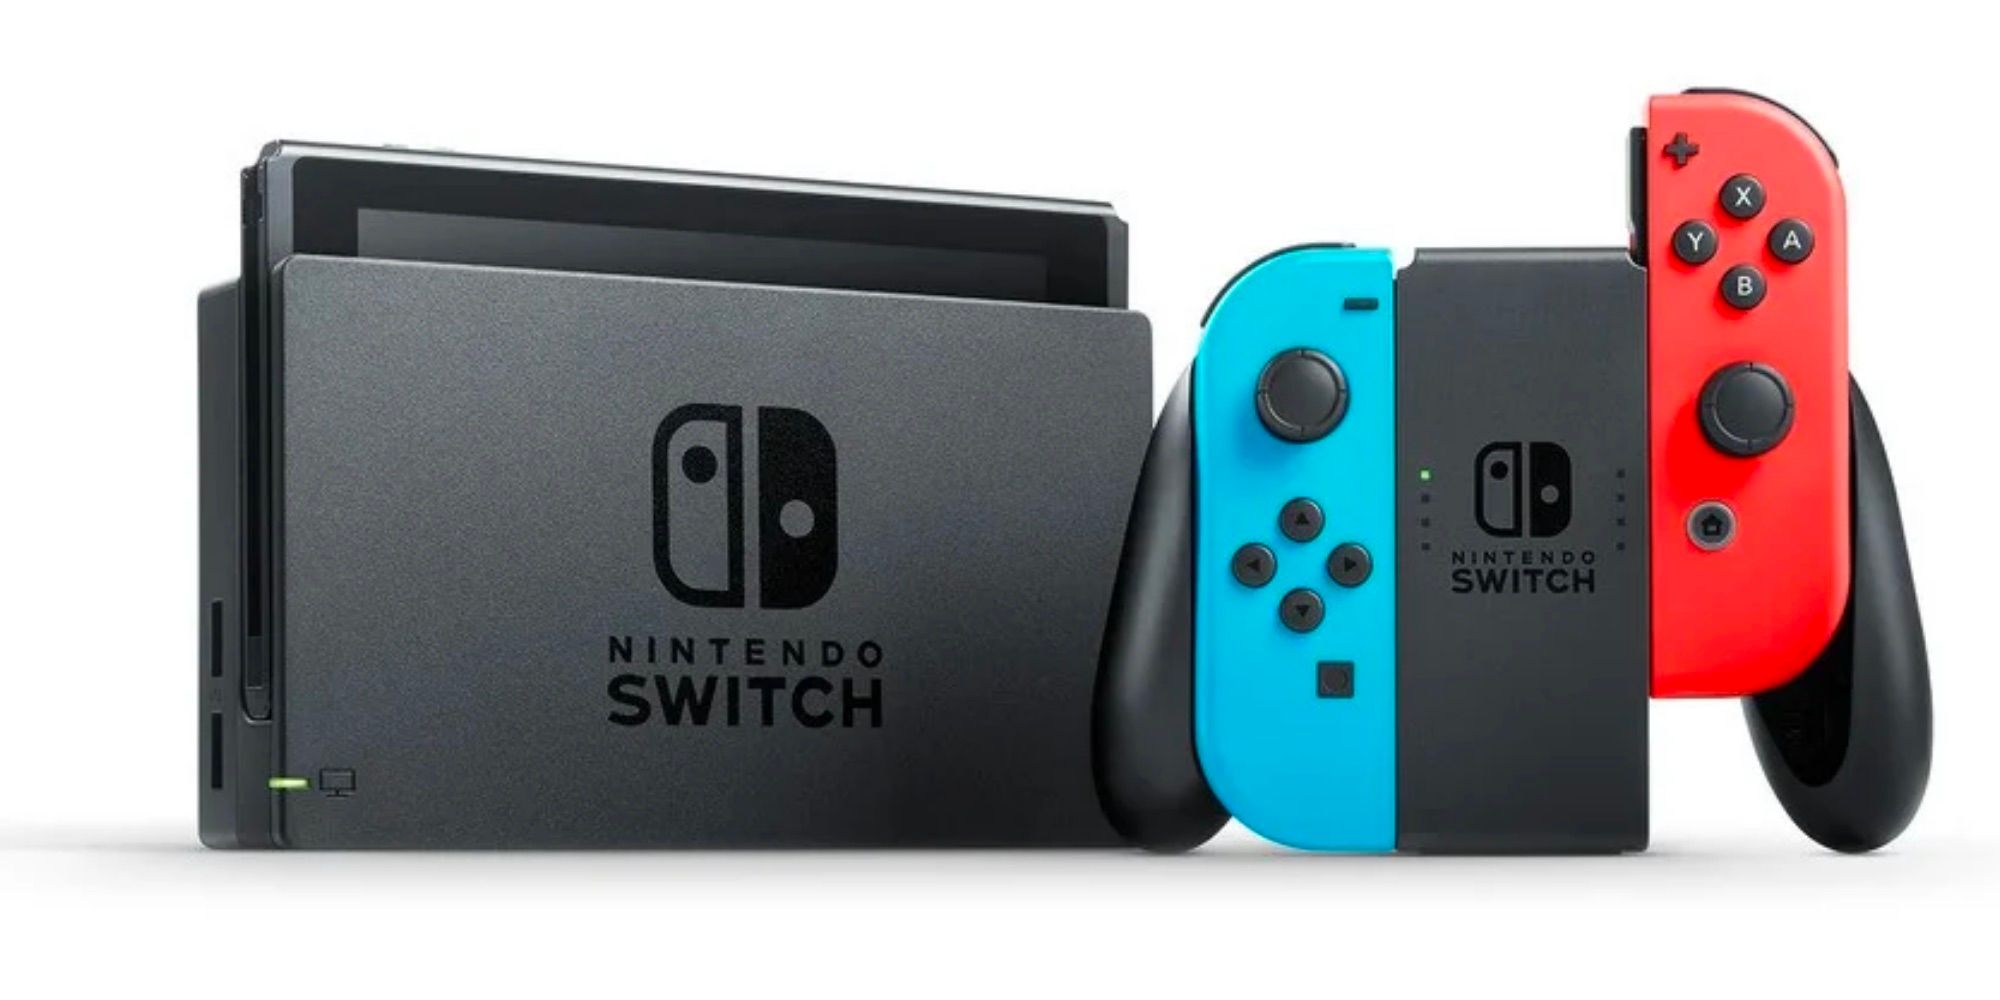 Nintendo Switch console and controller